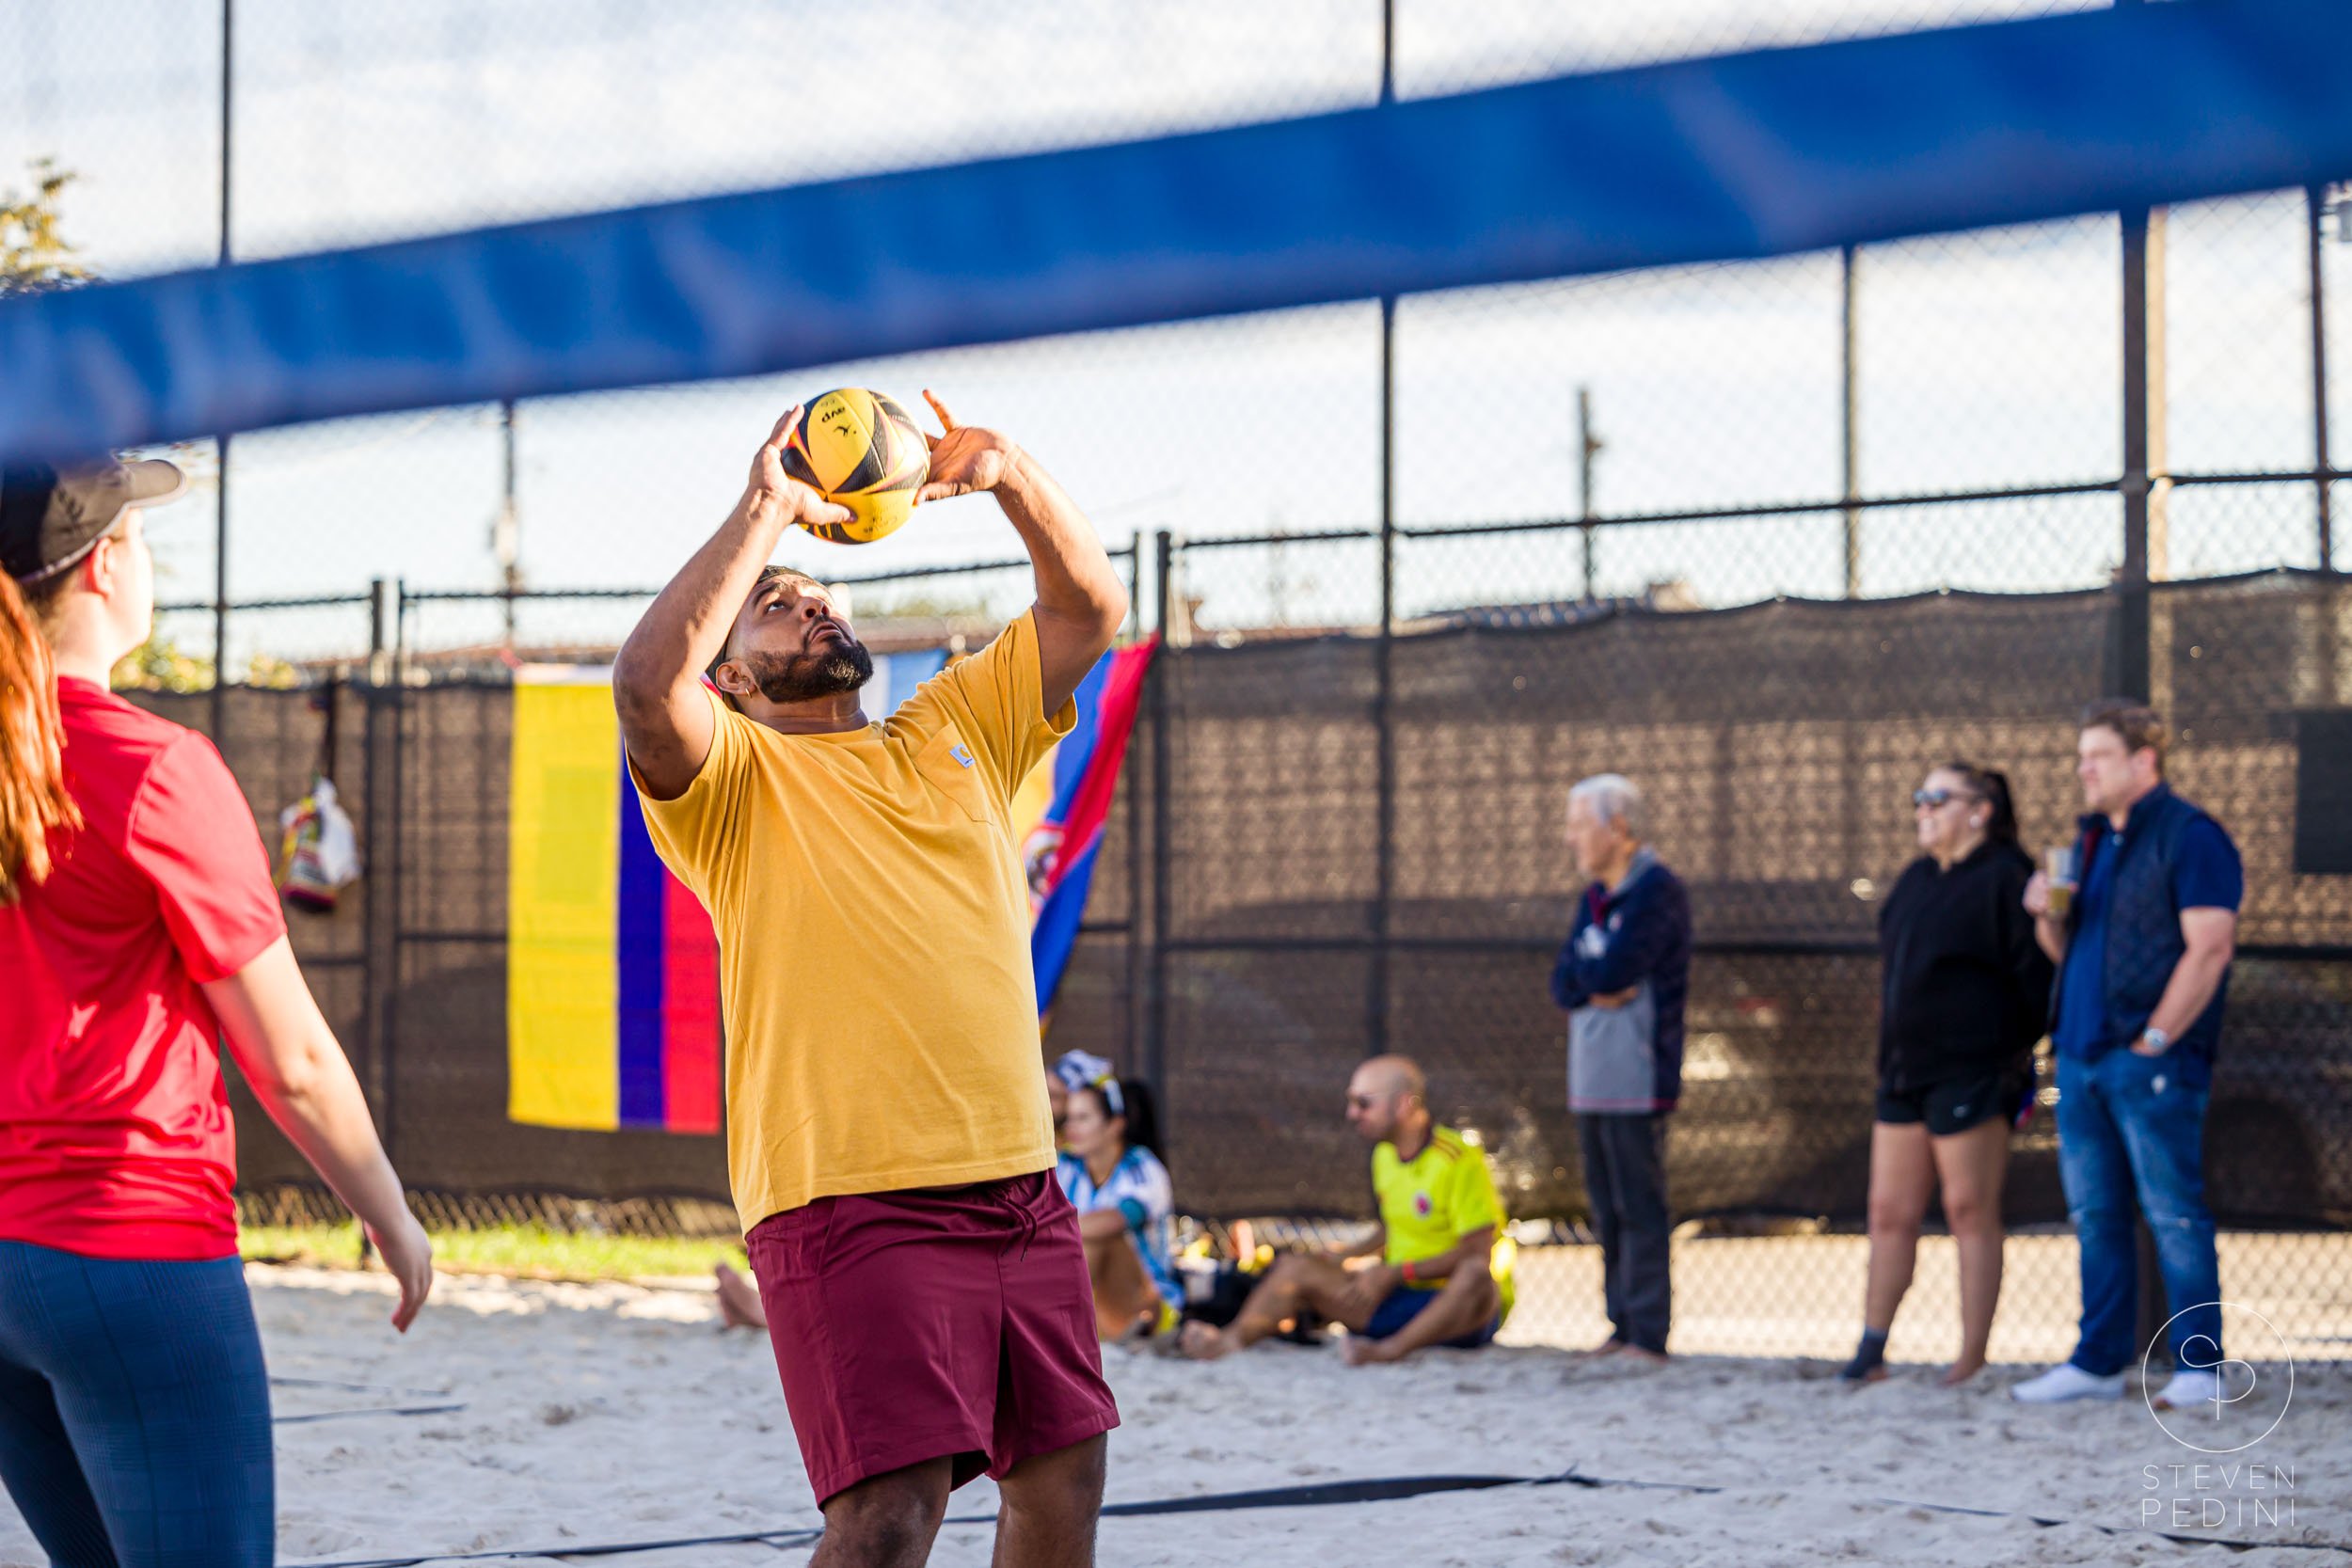 Steven Pedini Photography - Bumpy Pickle - Sand Volleyball - Houston TX - World Cup of Volleyball - 00103.jpg